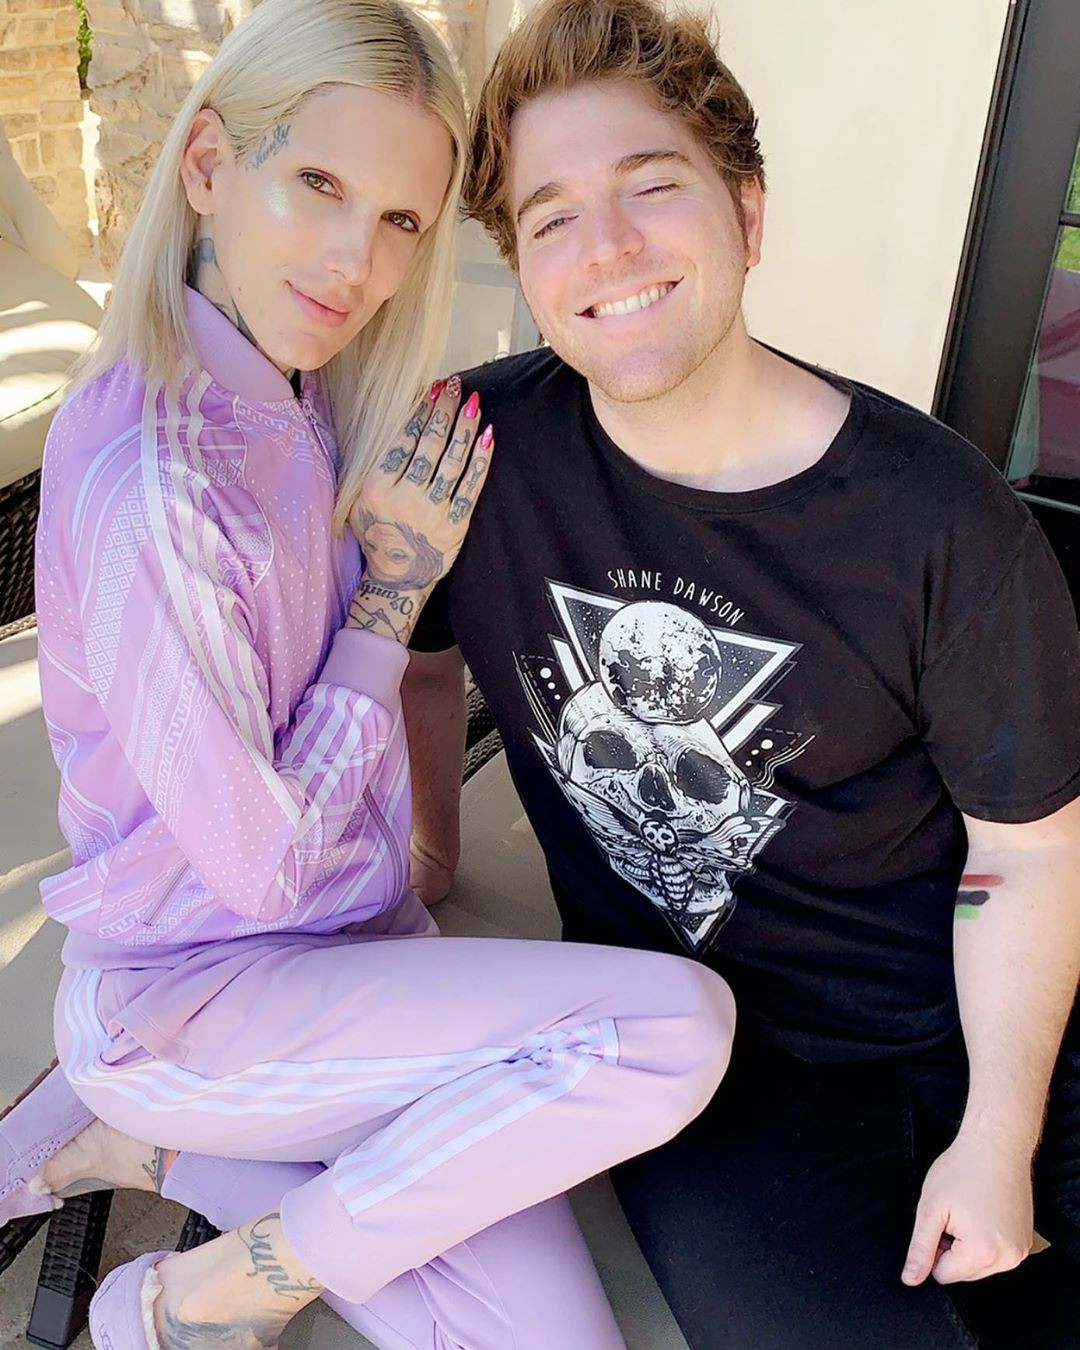 Jeffree Star goes viral after calling out 'they' and 'them